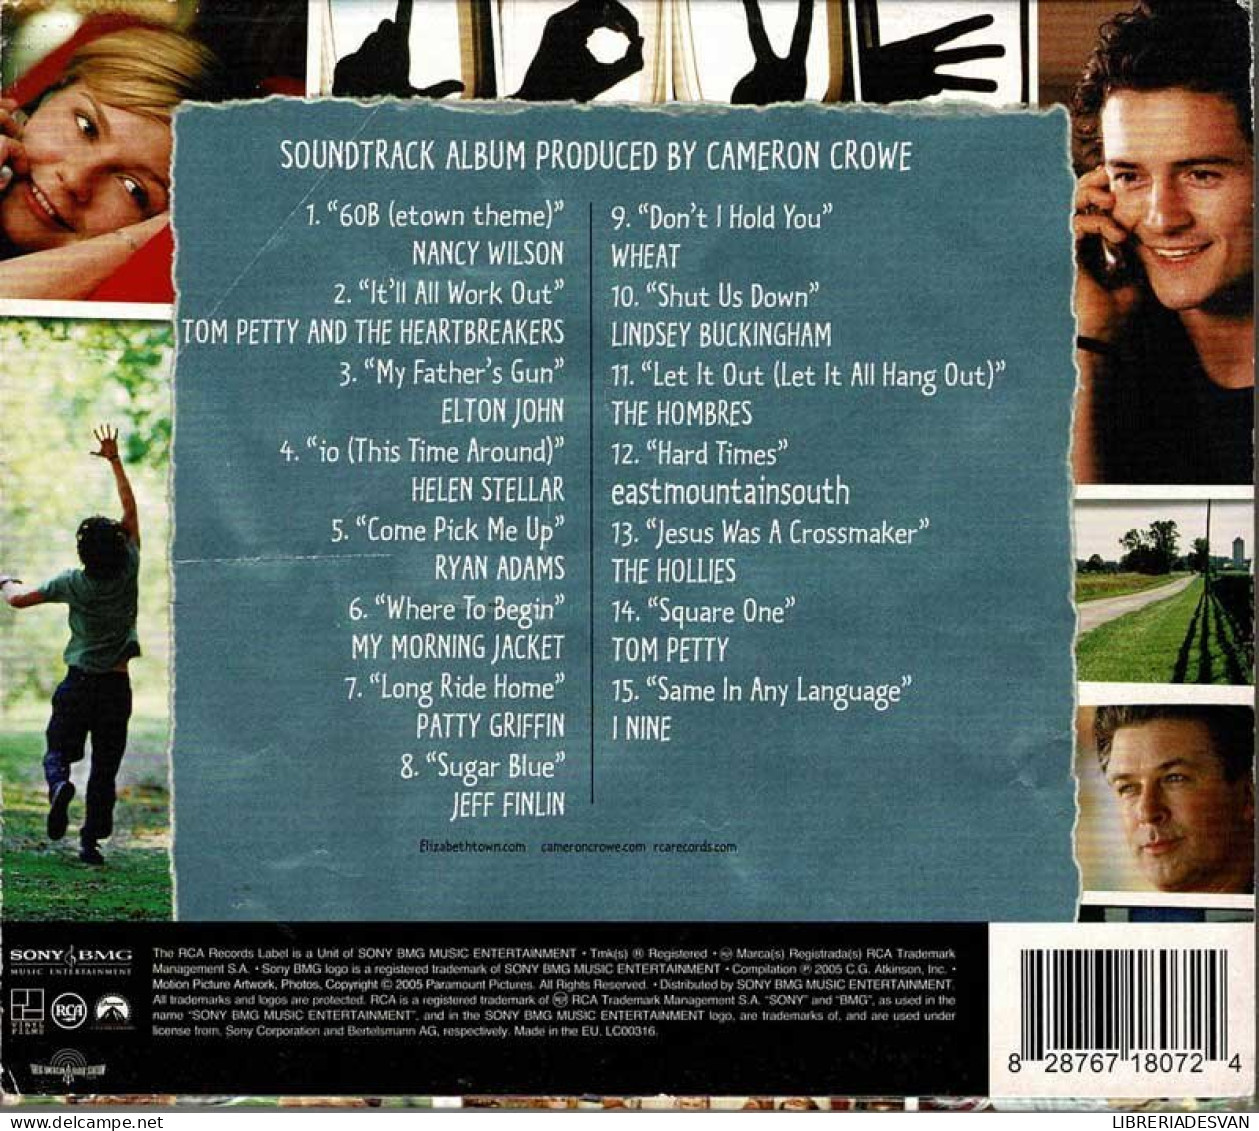 Elizabethtown - Music From The Motion Picture. CD - Soundtracks, Film Music